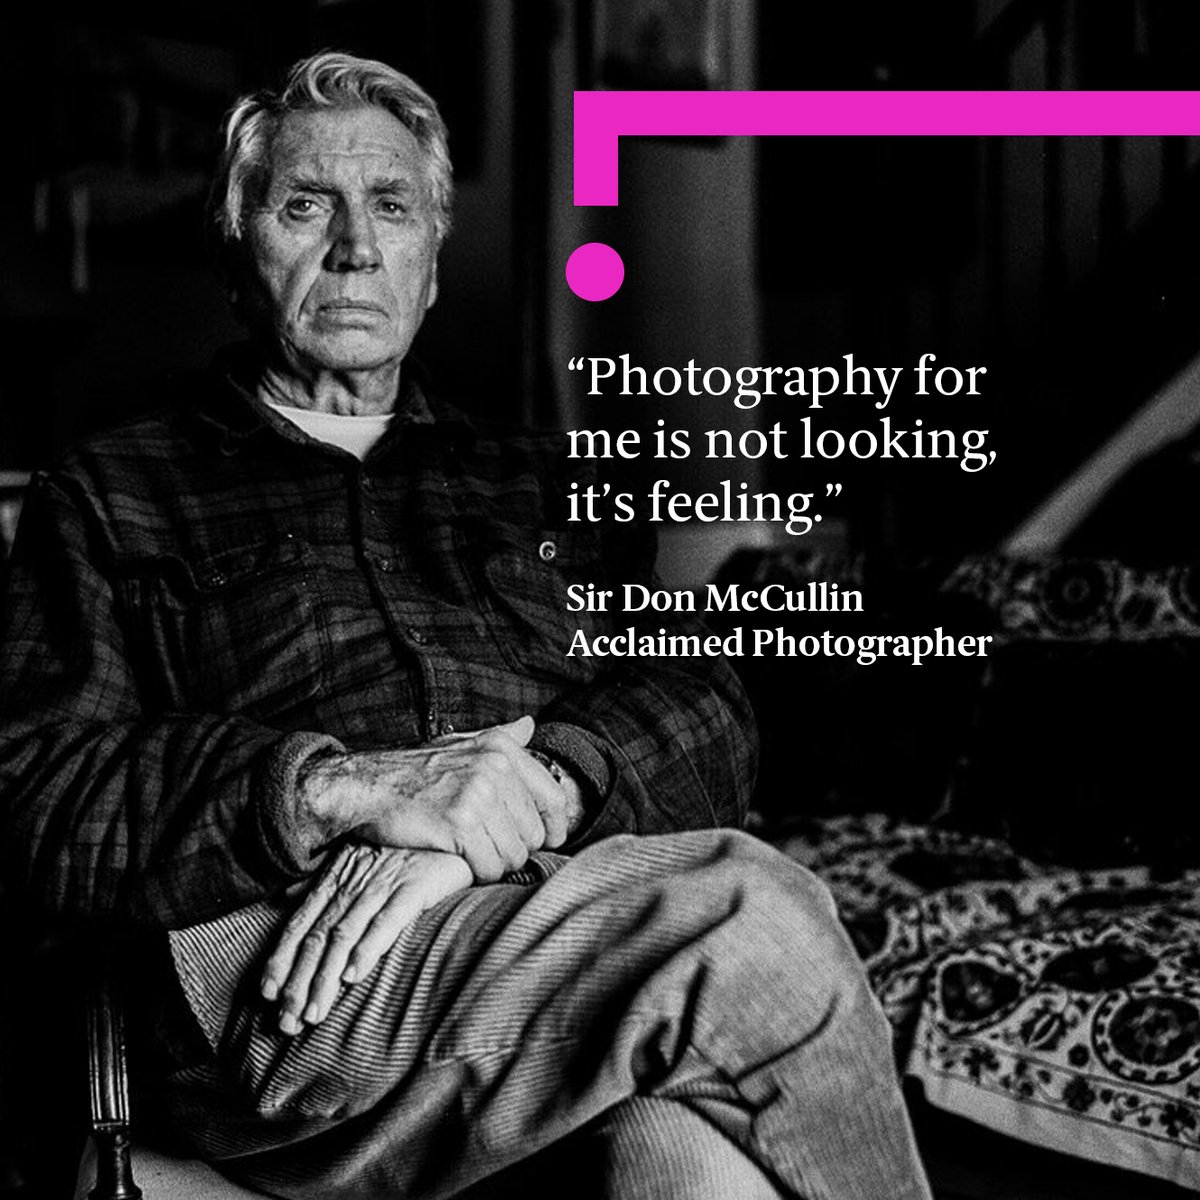 “Photography for me is not looking, it’s feeling.” In an interview with @TinaBrownLM at #SirHarrySummit on 15 May, legendary photojournalist Sir Don McCullin will reflect on the futility of violence and how he has “sentenced himself to peace.” Tune into the livestream:…